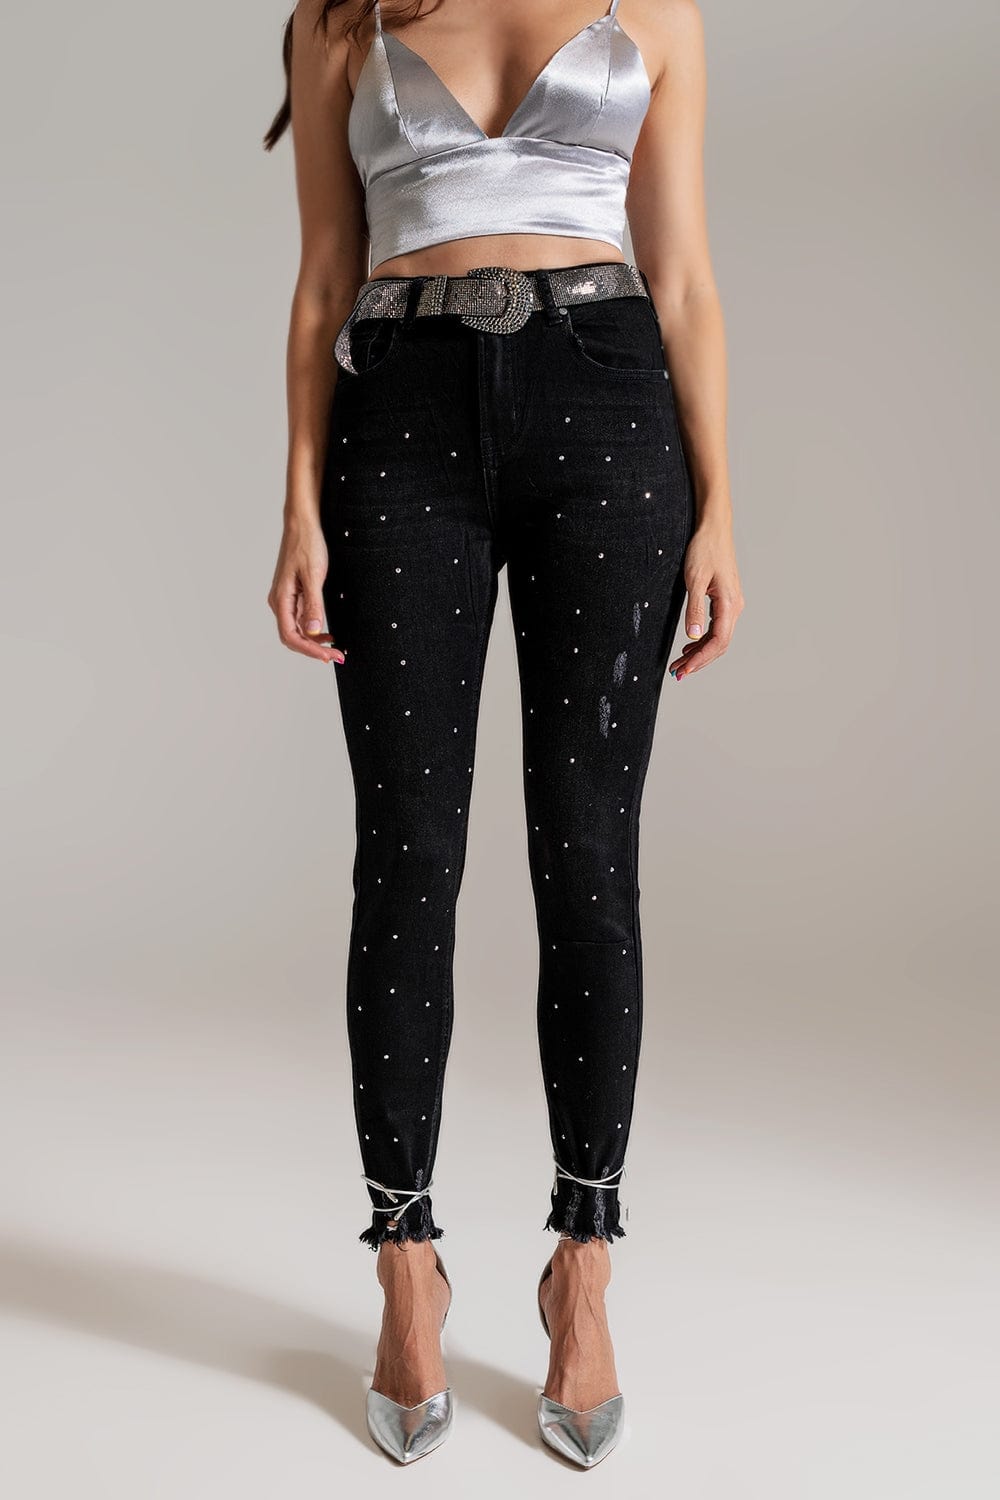 Q2 Women's Jean Skinny Jeans With Embellished Details In Black Wash